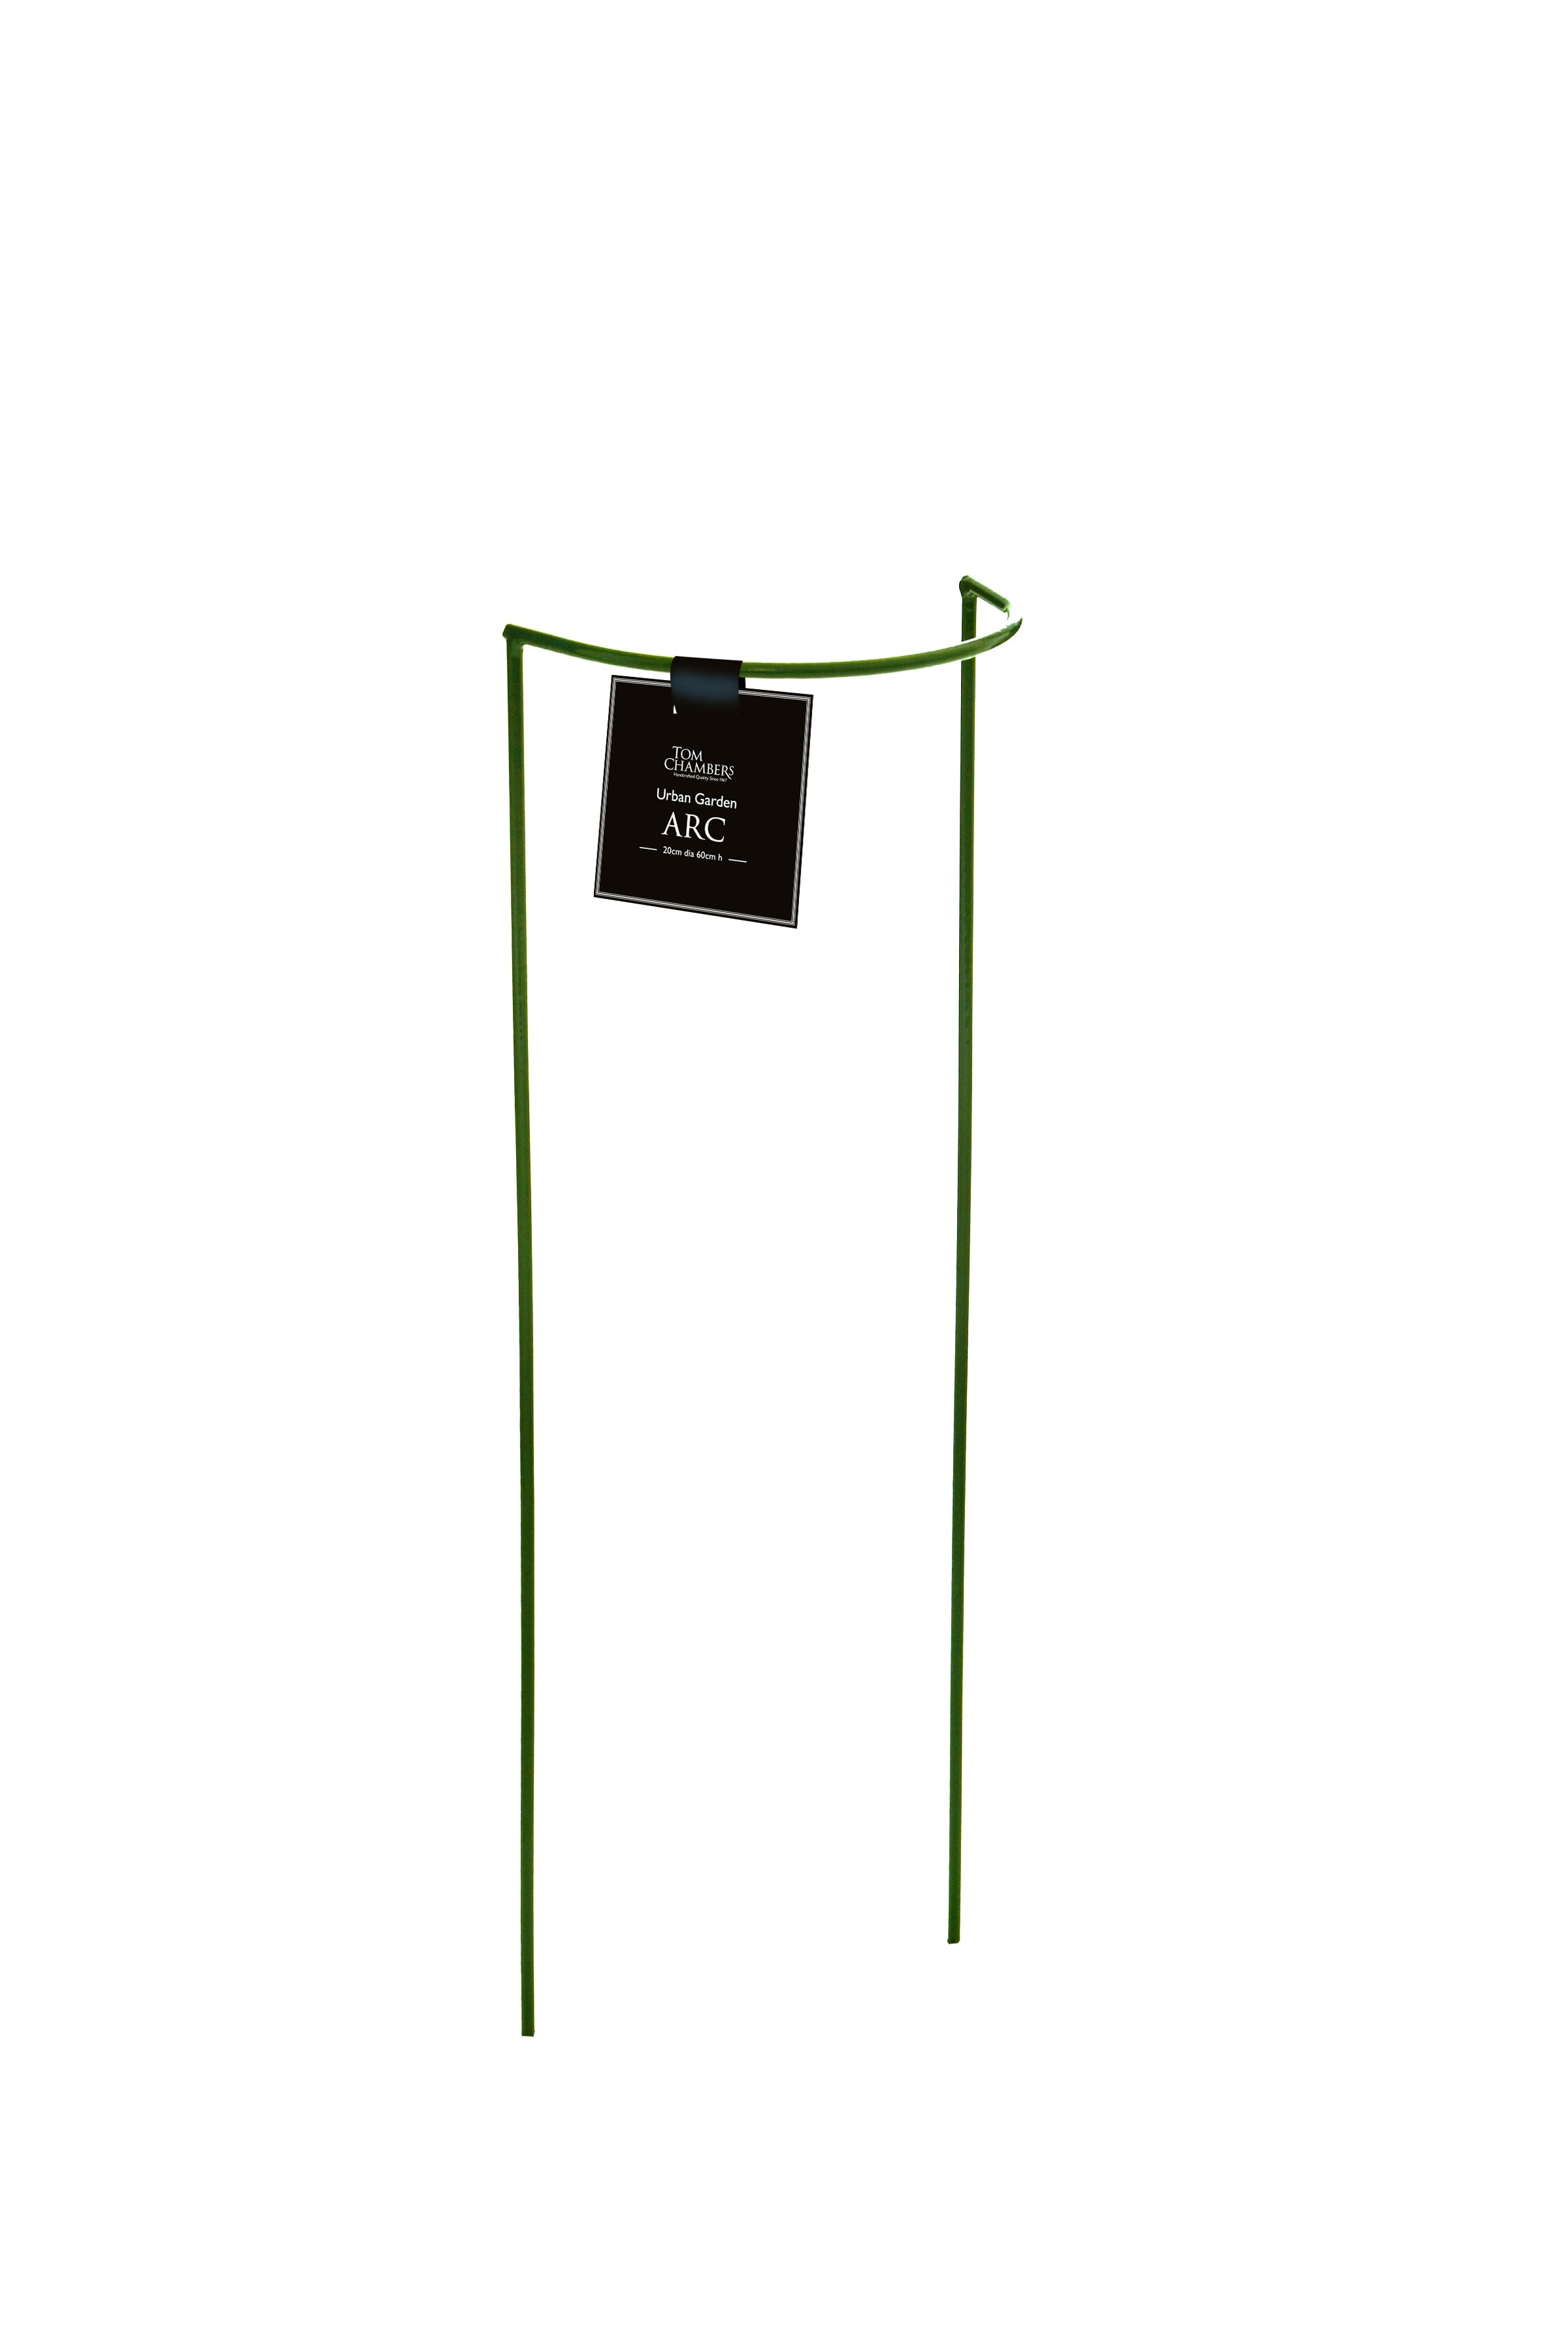 Pack of 3 Tom Chambers Urban Metal Green Herbaceous Garden Plant Support Arc 20cm x 60cm - Small